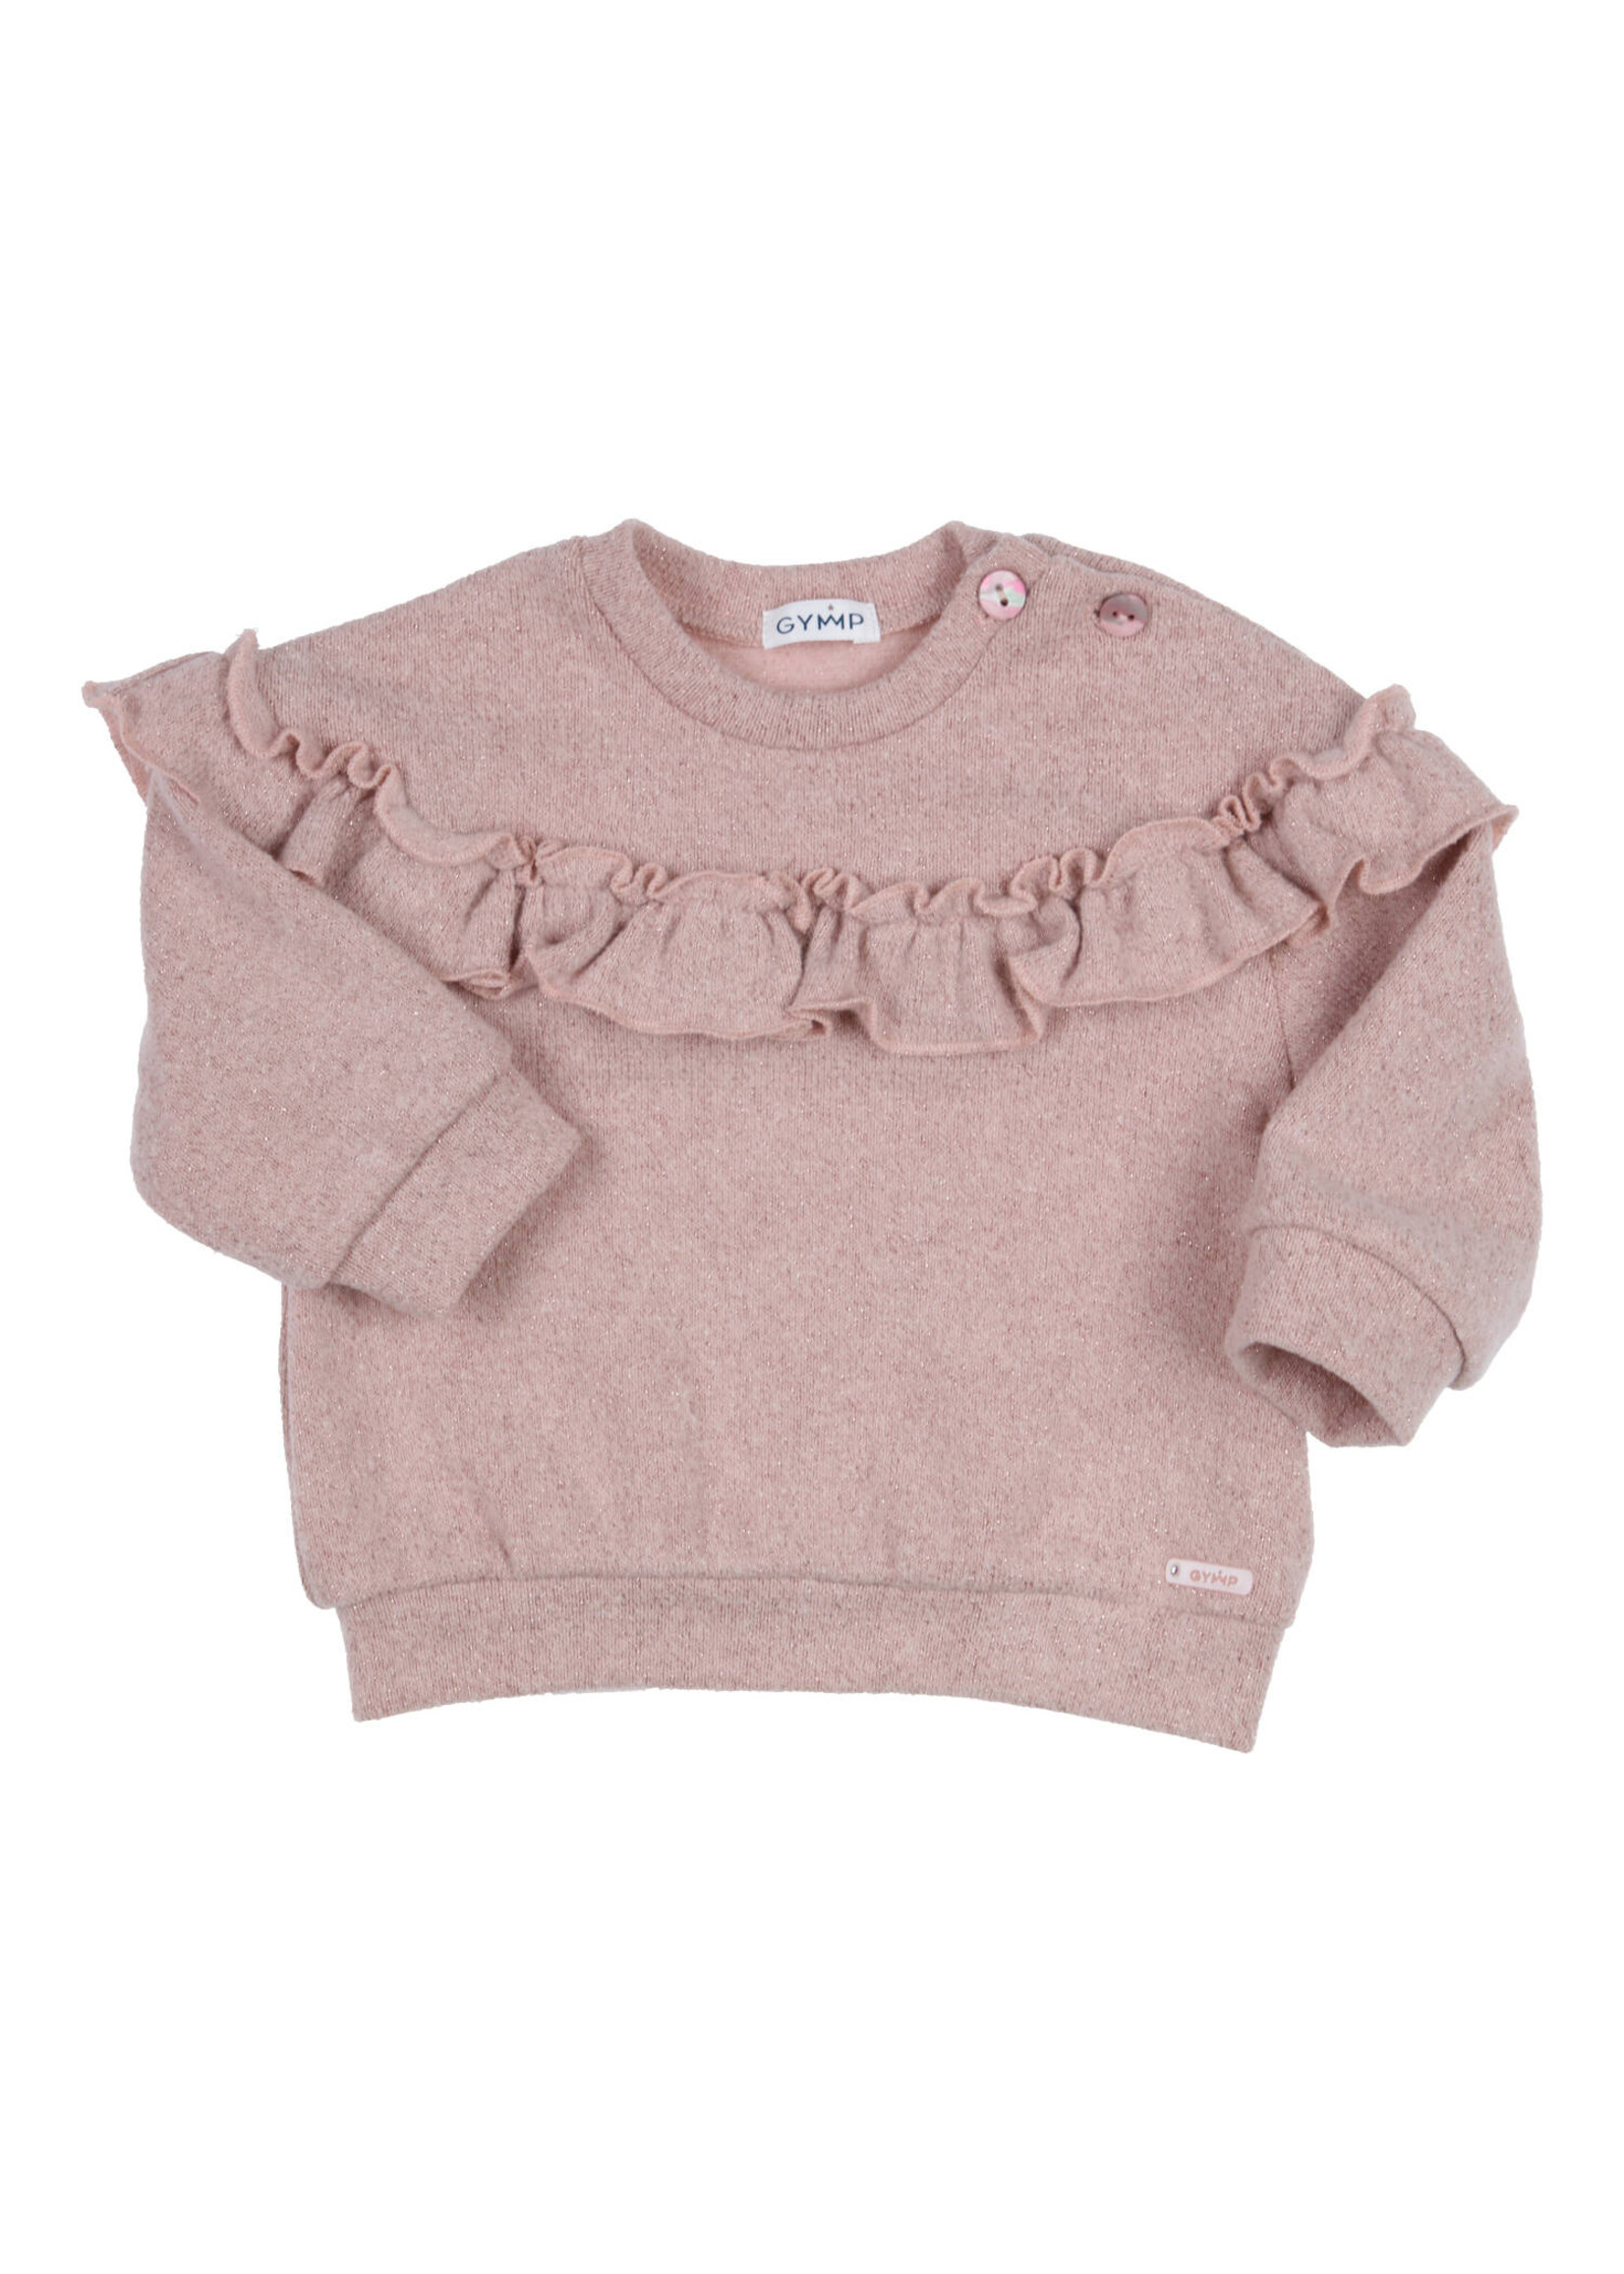 Gymp sweater lucia old rose